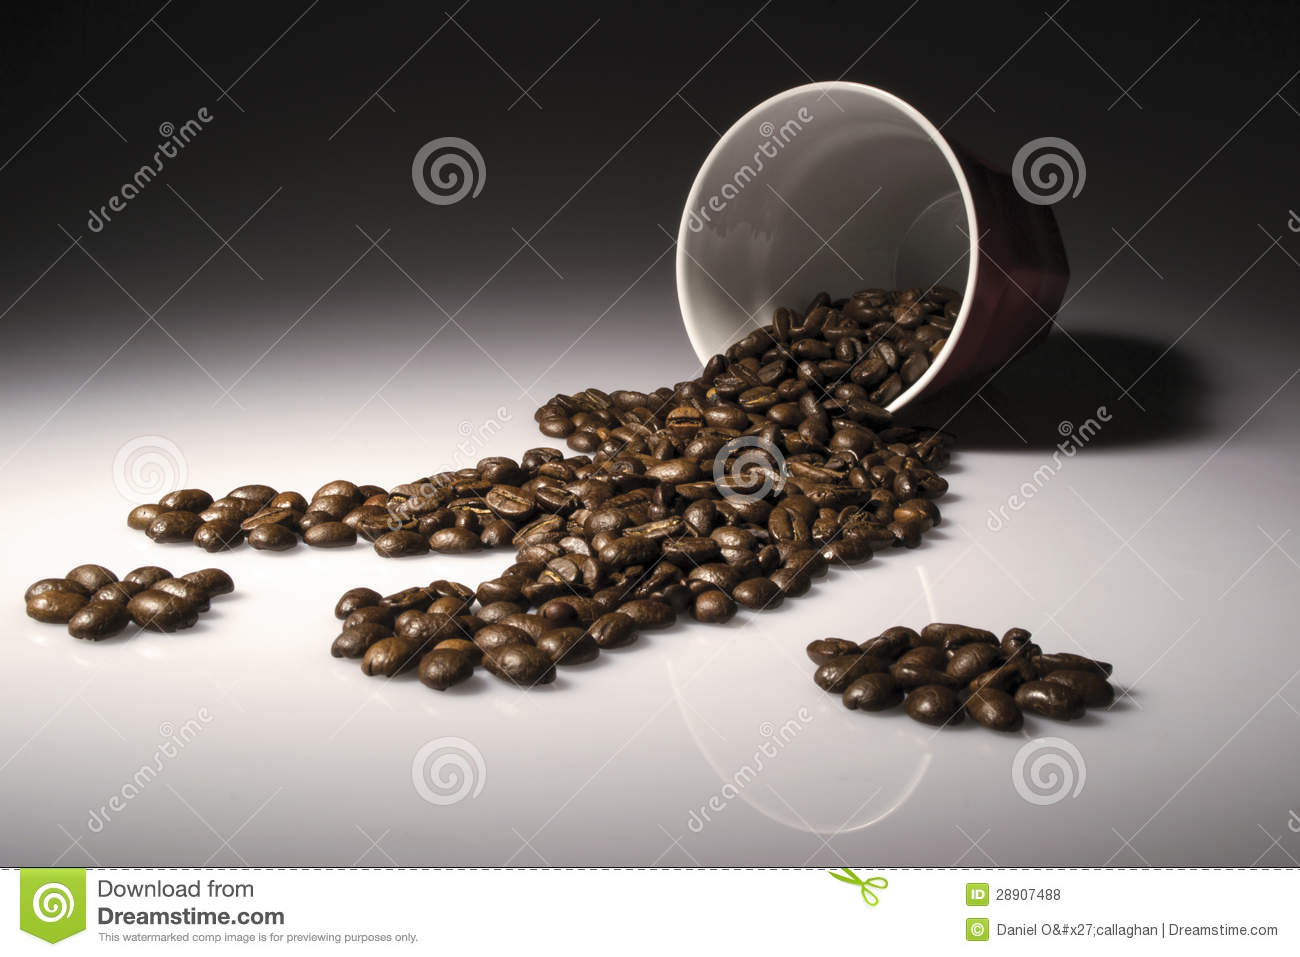 Coffee Spill Royalty Free Stock Photos   Image  28907488